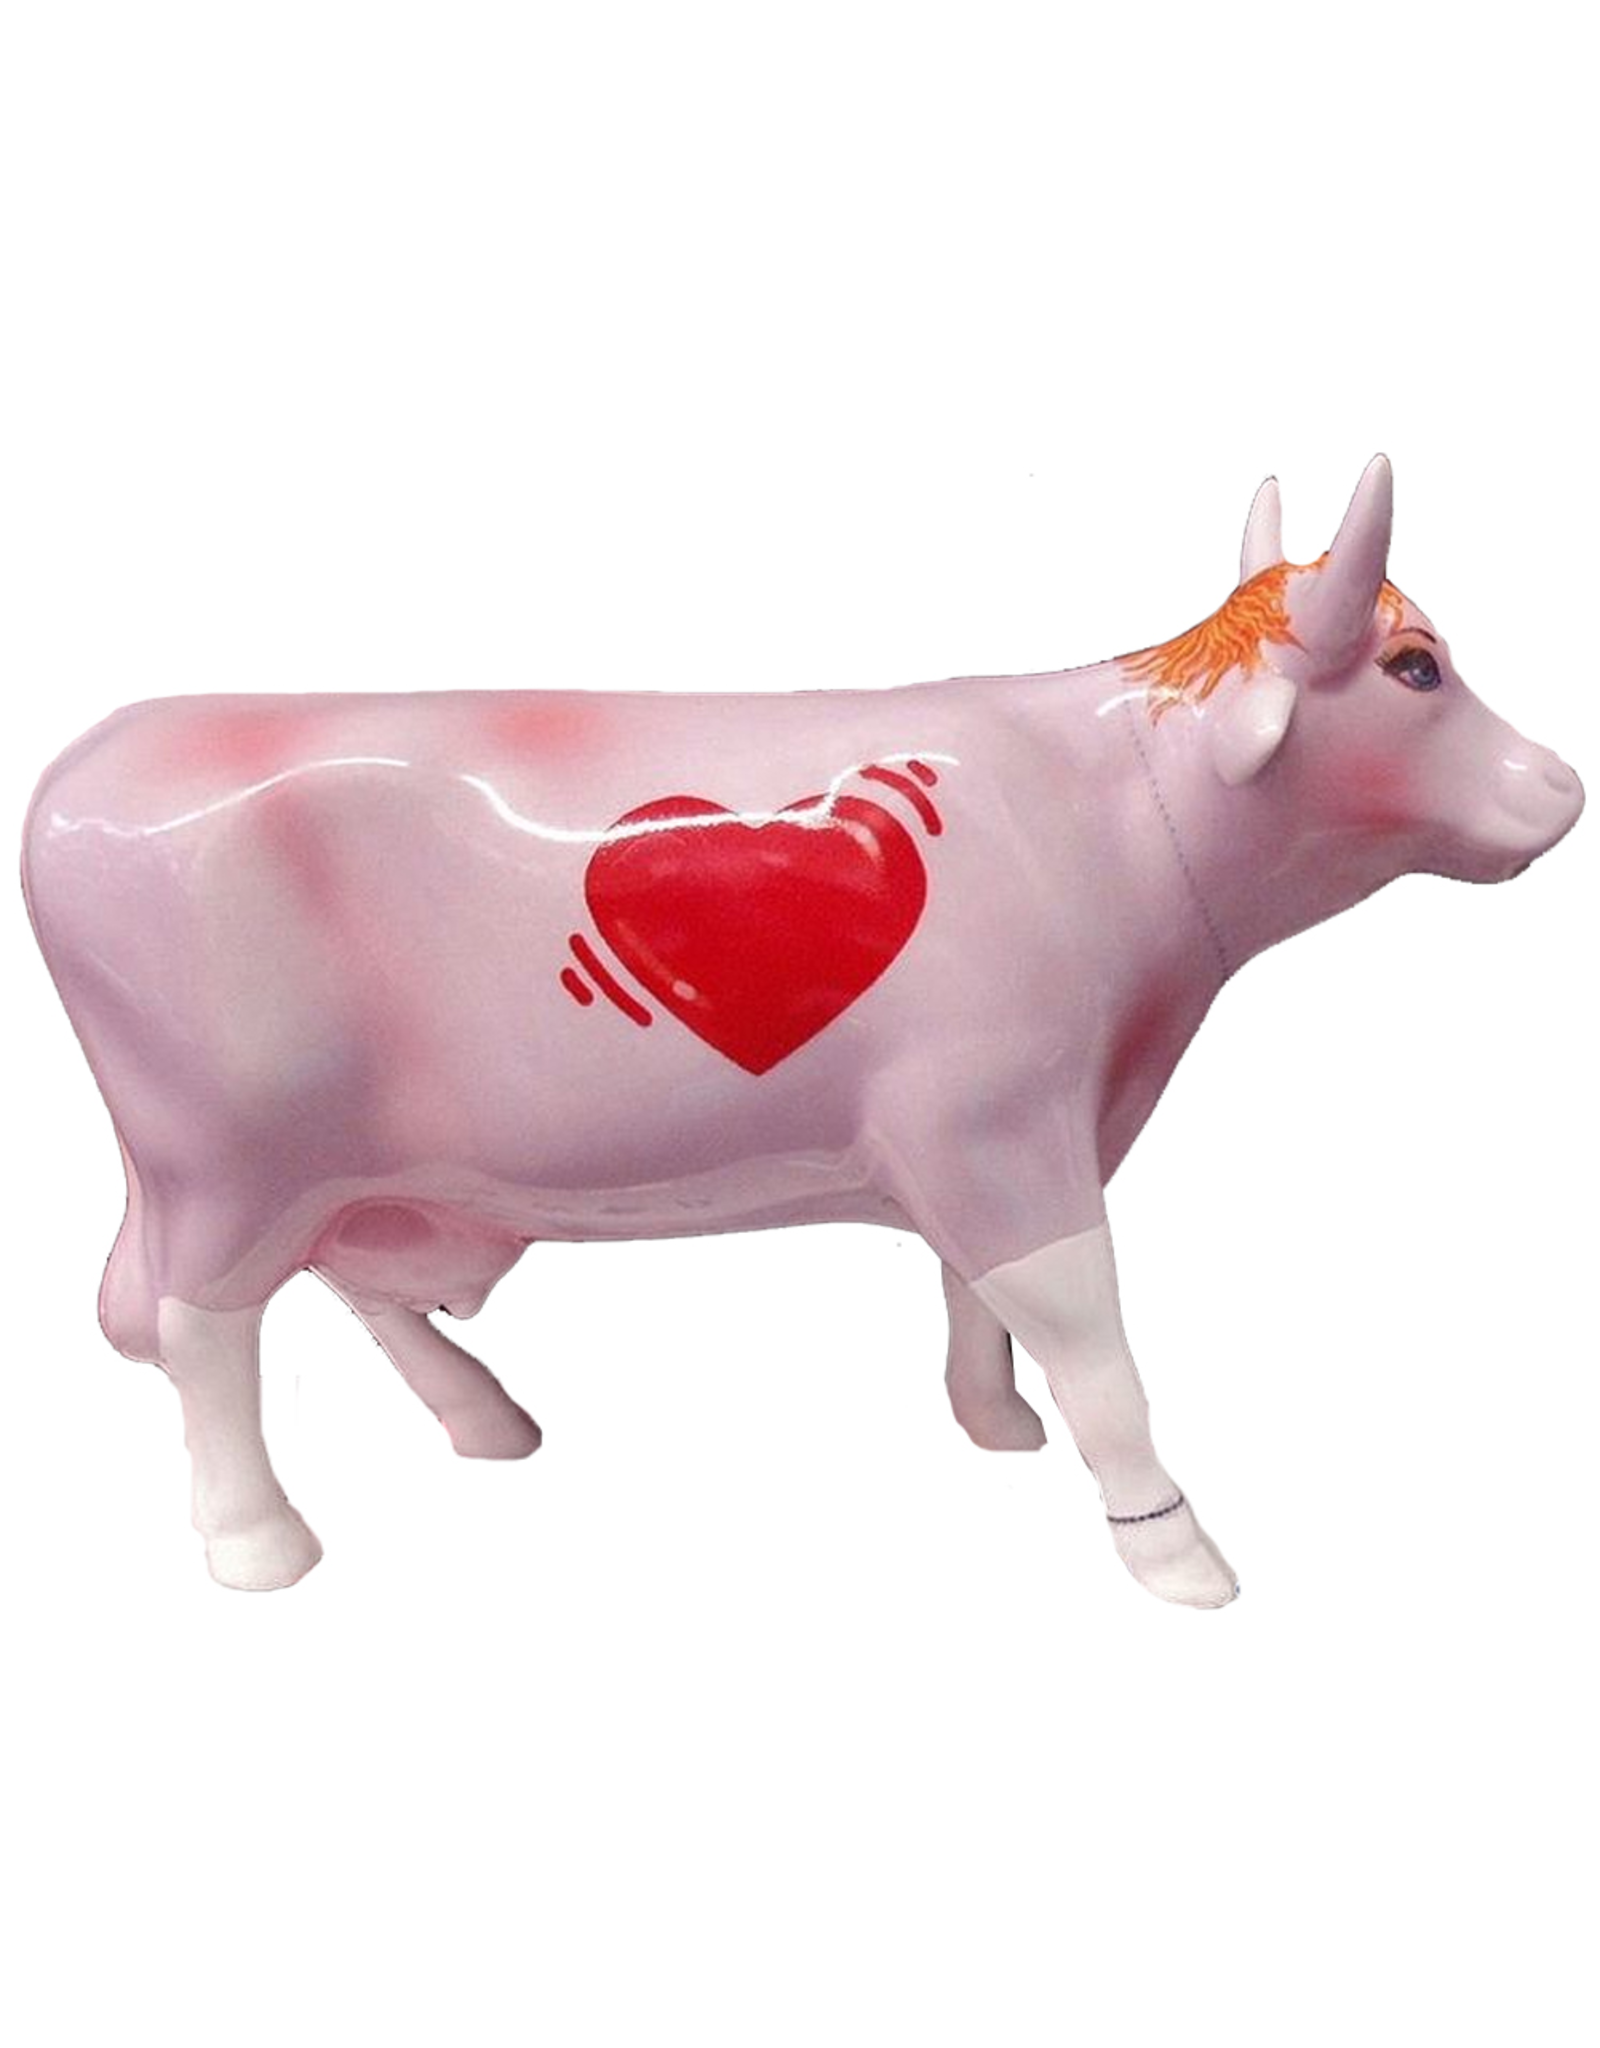 Cow Parade Dating Cow 9161 Retired CowParade Collectible Figurine